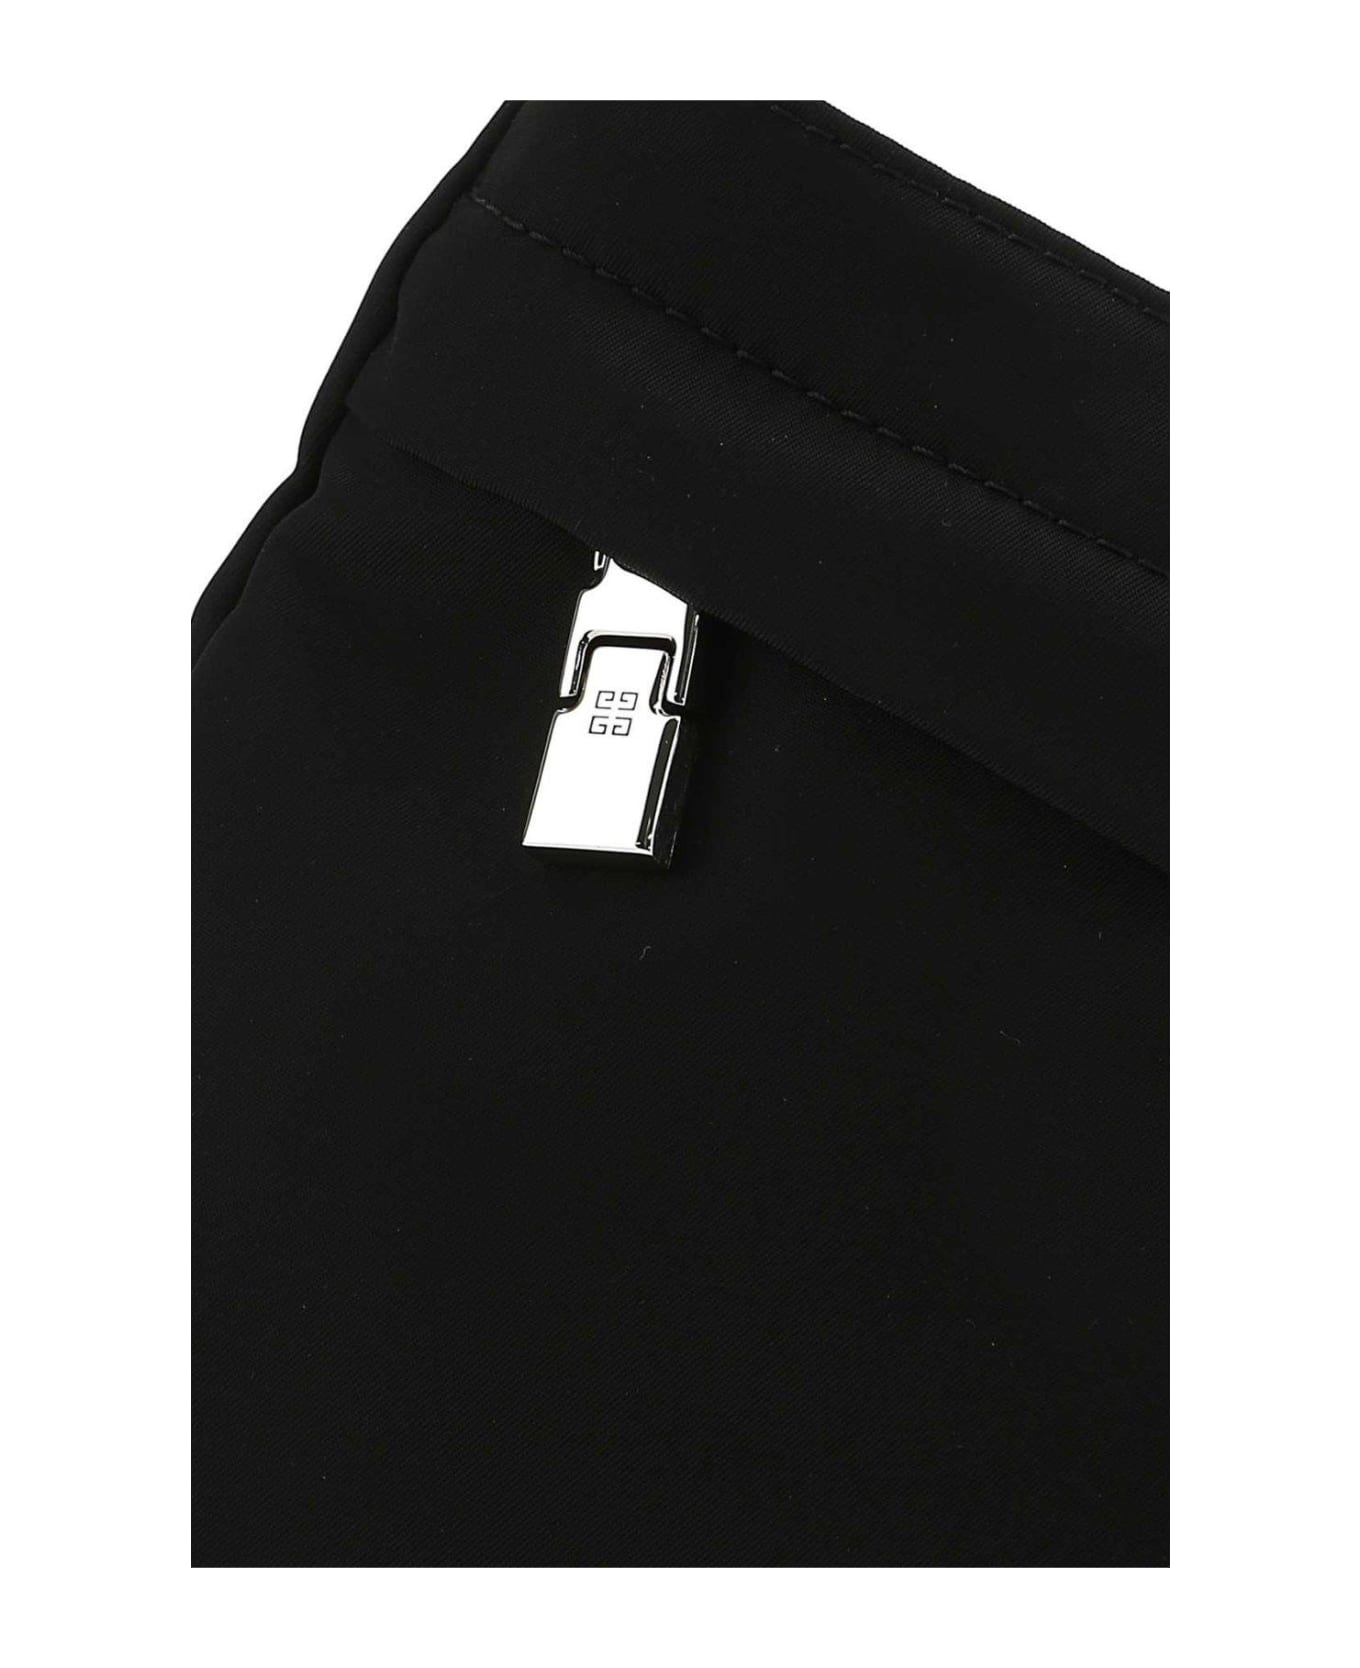 Givenchy Logo Printed Iphone Pouch - Black